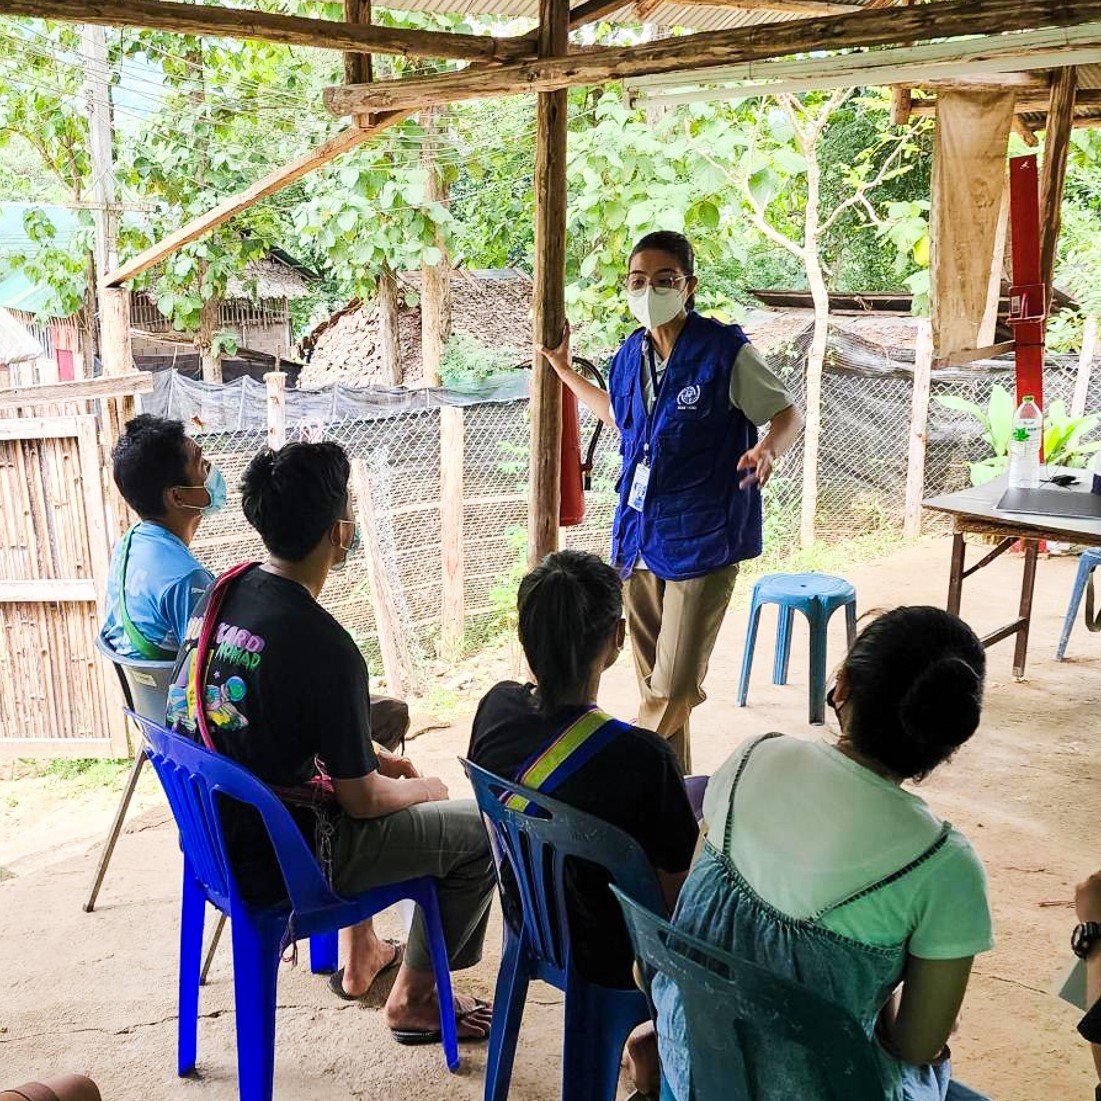 Tuberculosis continues to be an important public health concern. With support from the @GlobalFund, we conduct tuberculosis screening for migrants and mobile populations at Mae La temporary shelter, along the Thai-Myanmar border. Learn more ➡️ bit.ly/3W63TVq